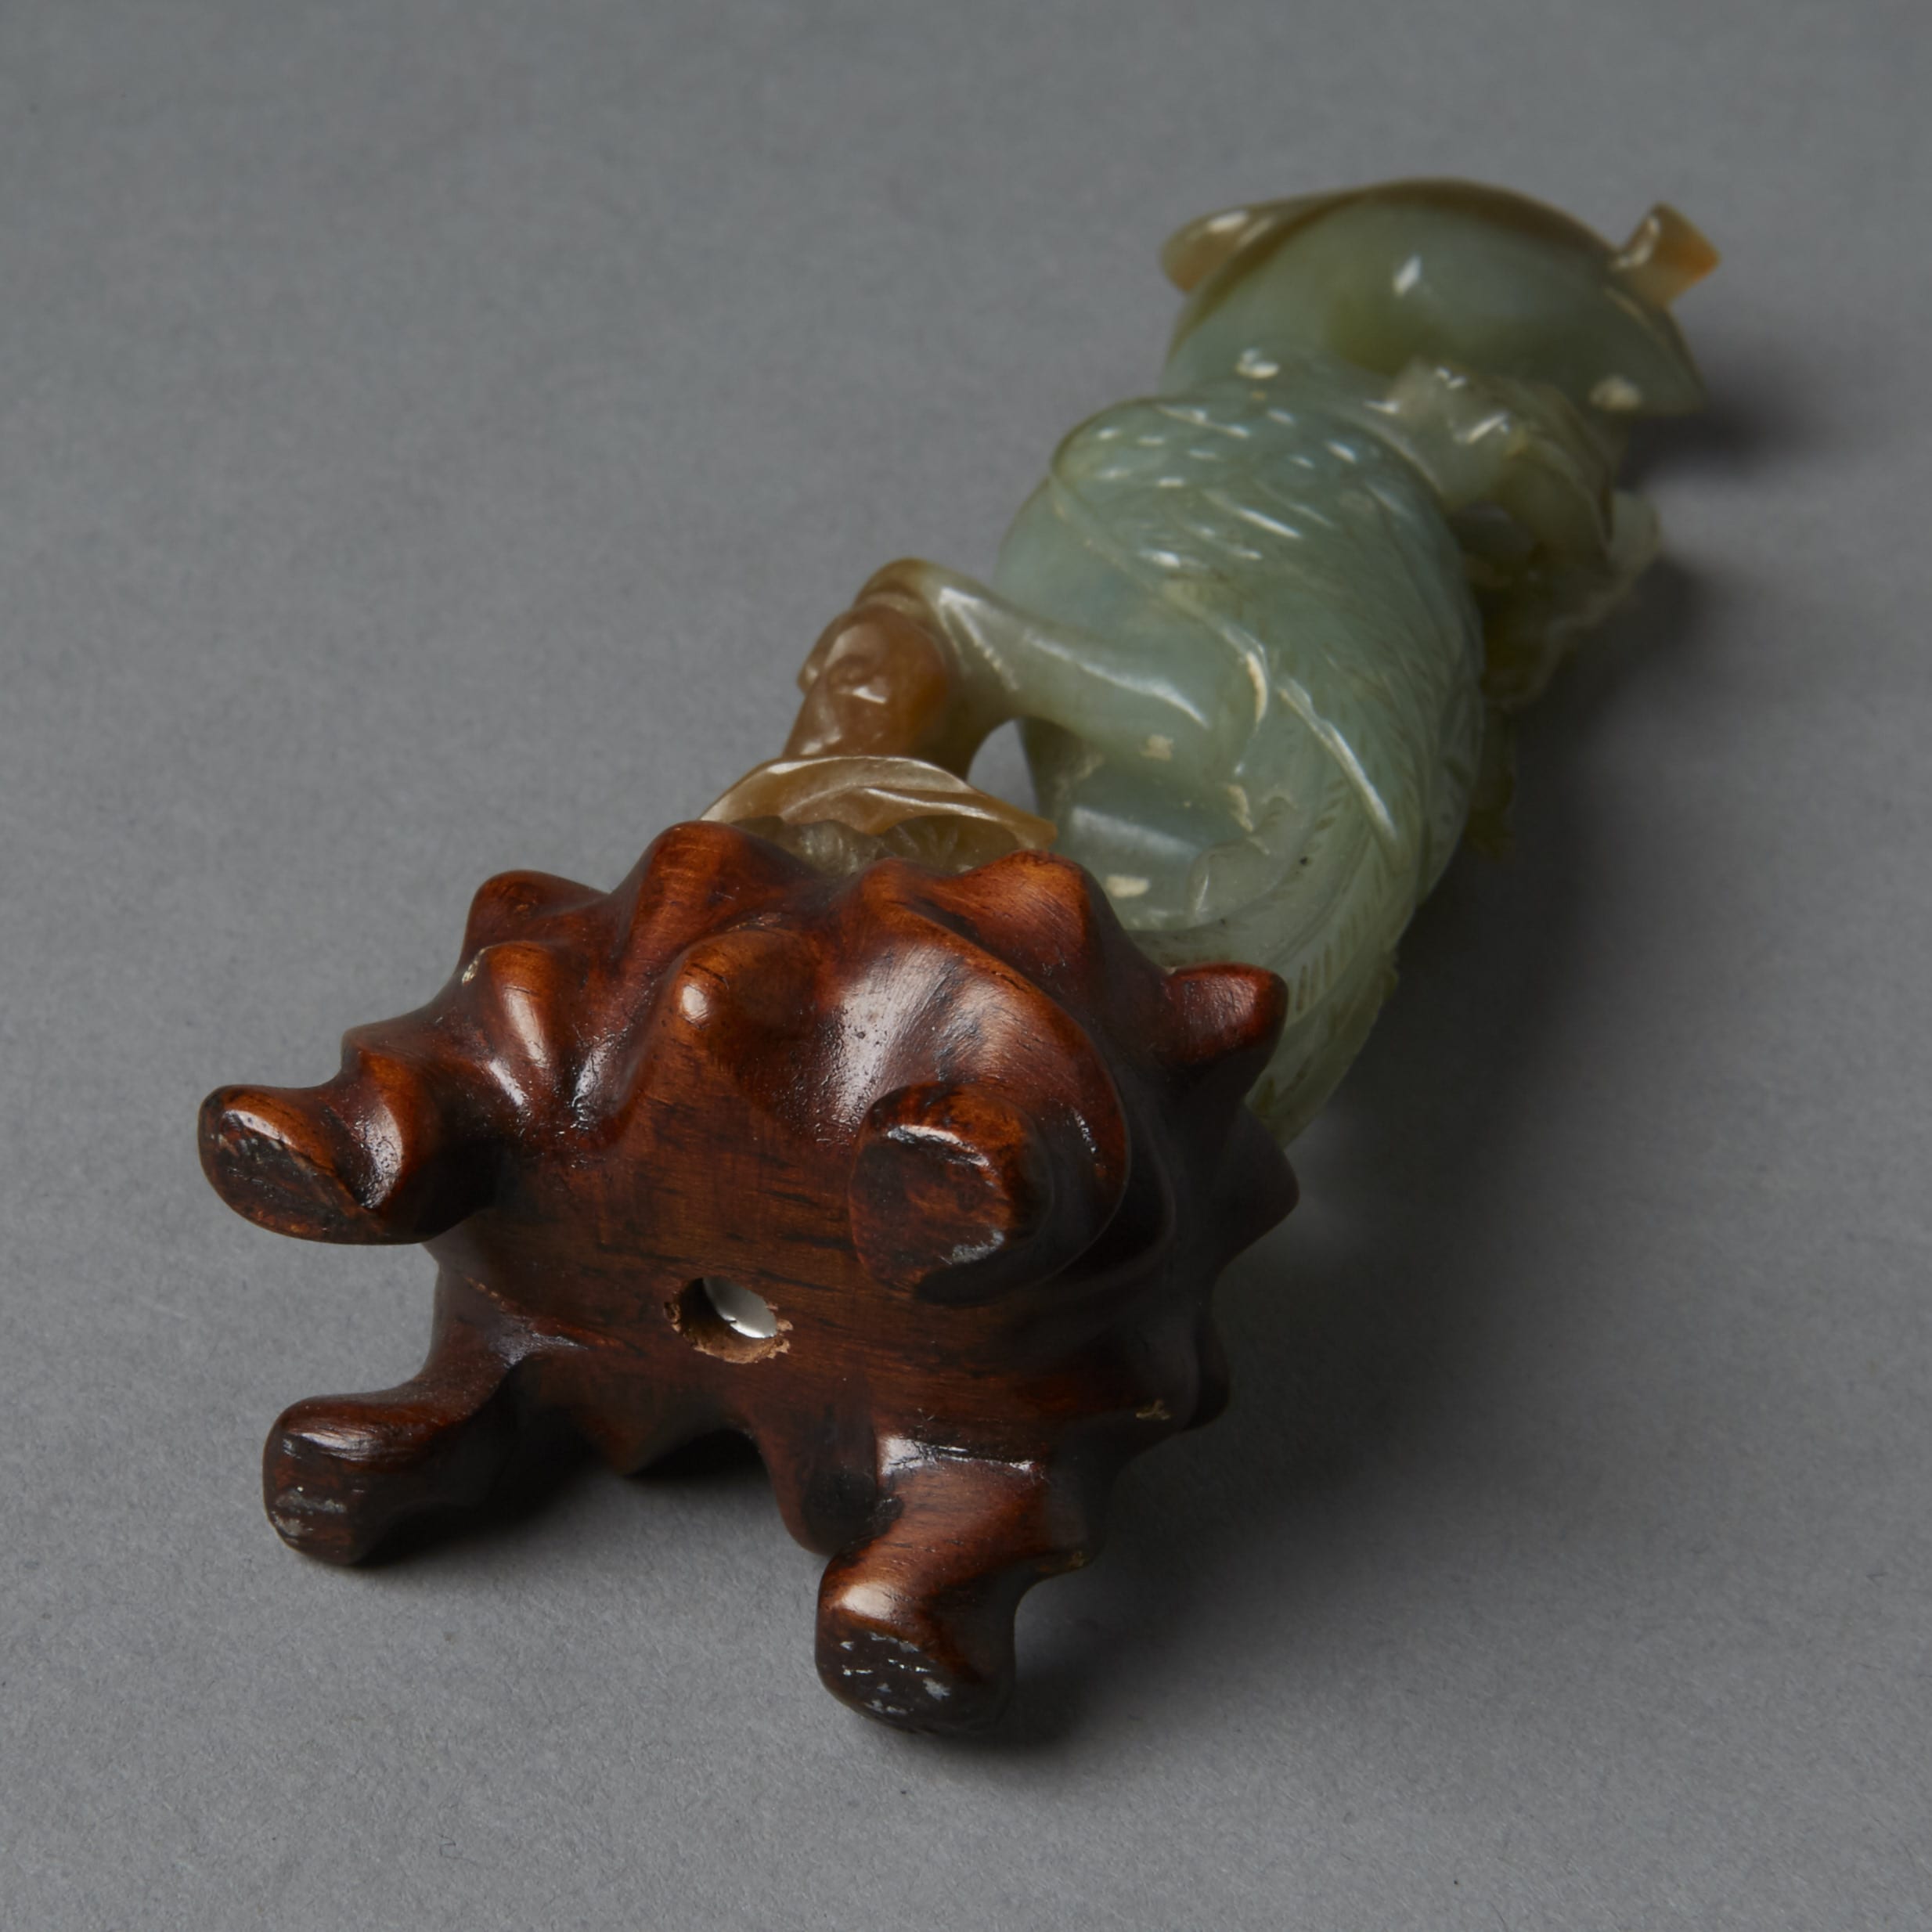 Lot 019: Chinese 19th century green Jade Carving of a Phoenix on Carved Wood Stand